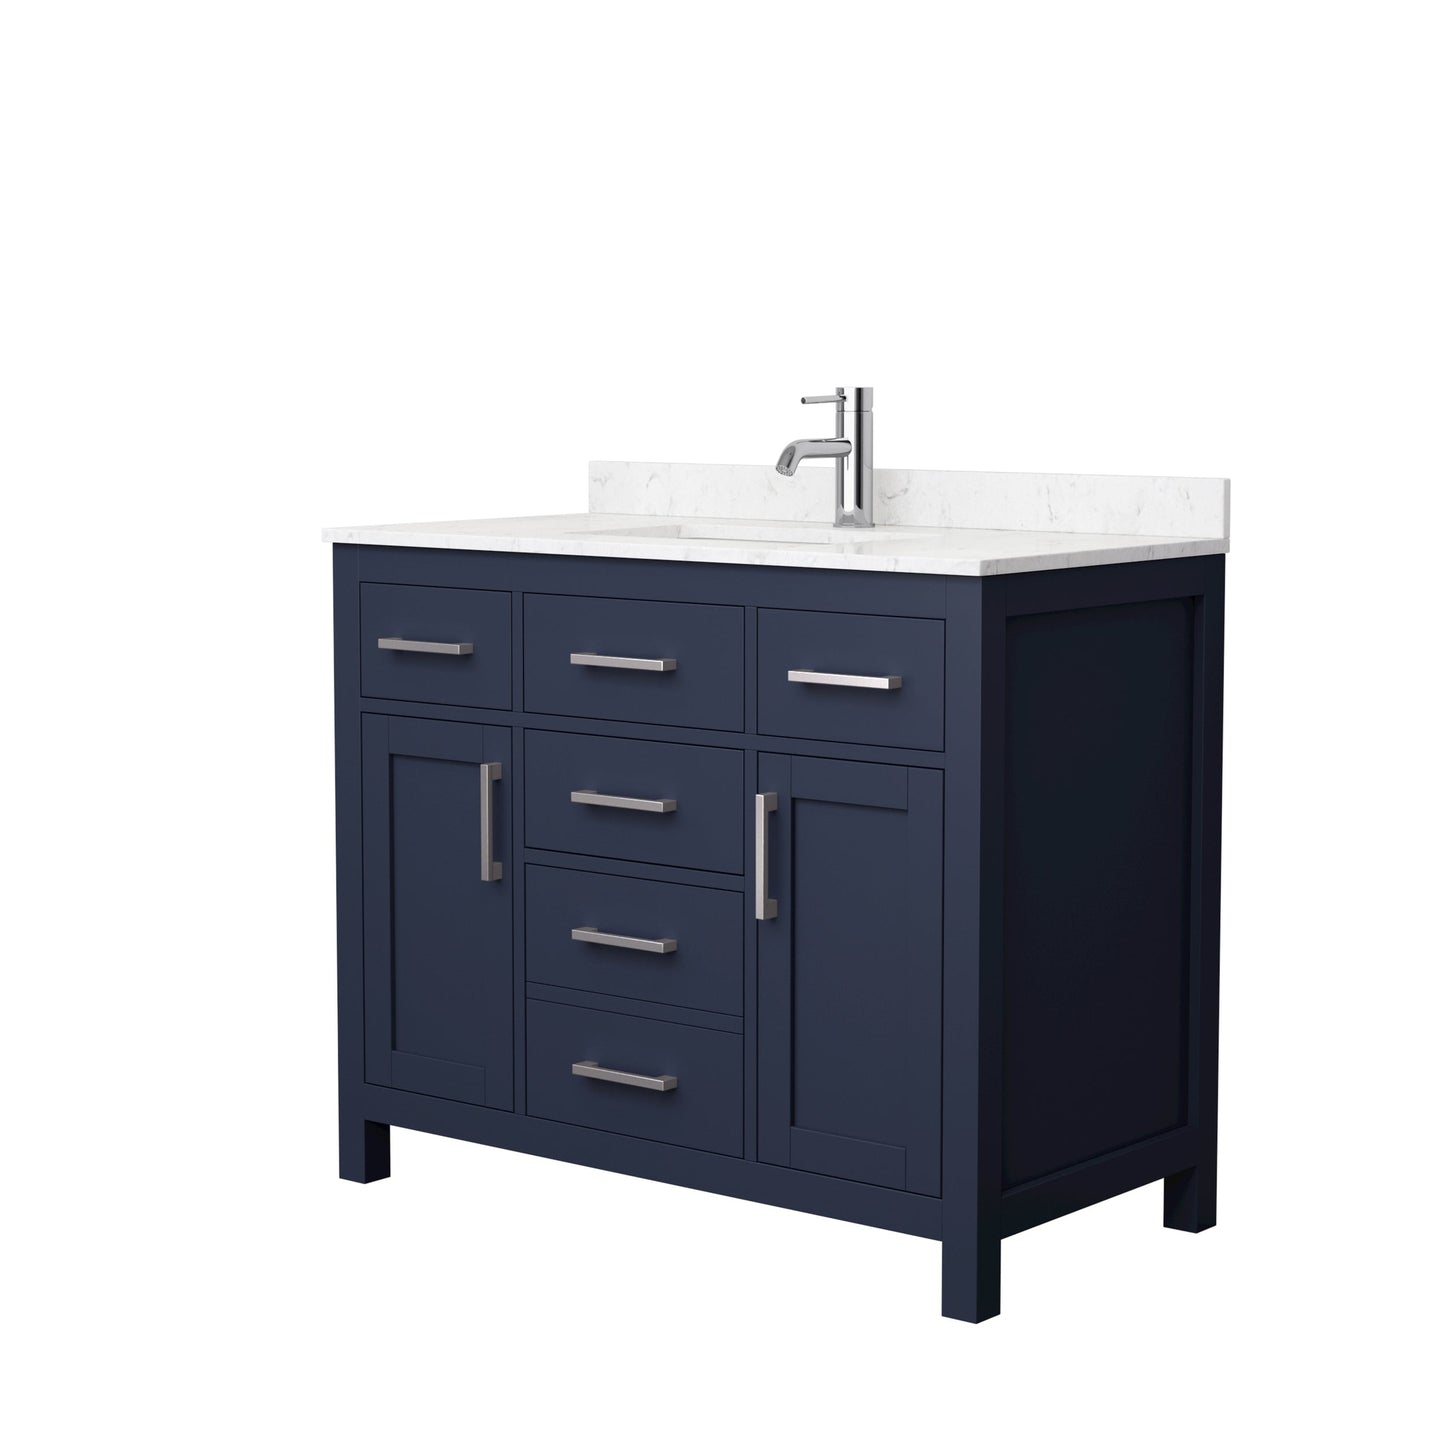 Wyndham Collection Beckett 42" Single Bathroom Dark Blue Vanity With White Carrara Cultured Marble Countertop, Undermount Square Sink And Brushed Nickel Trim